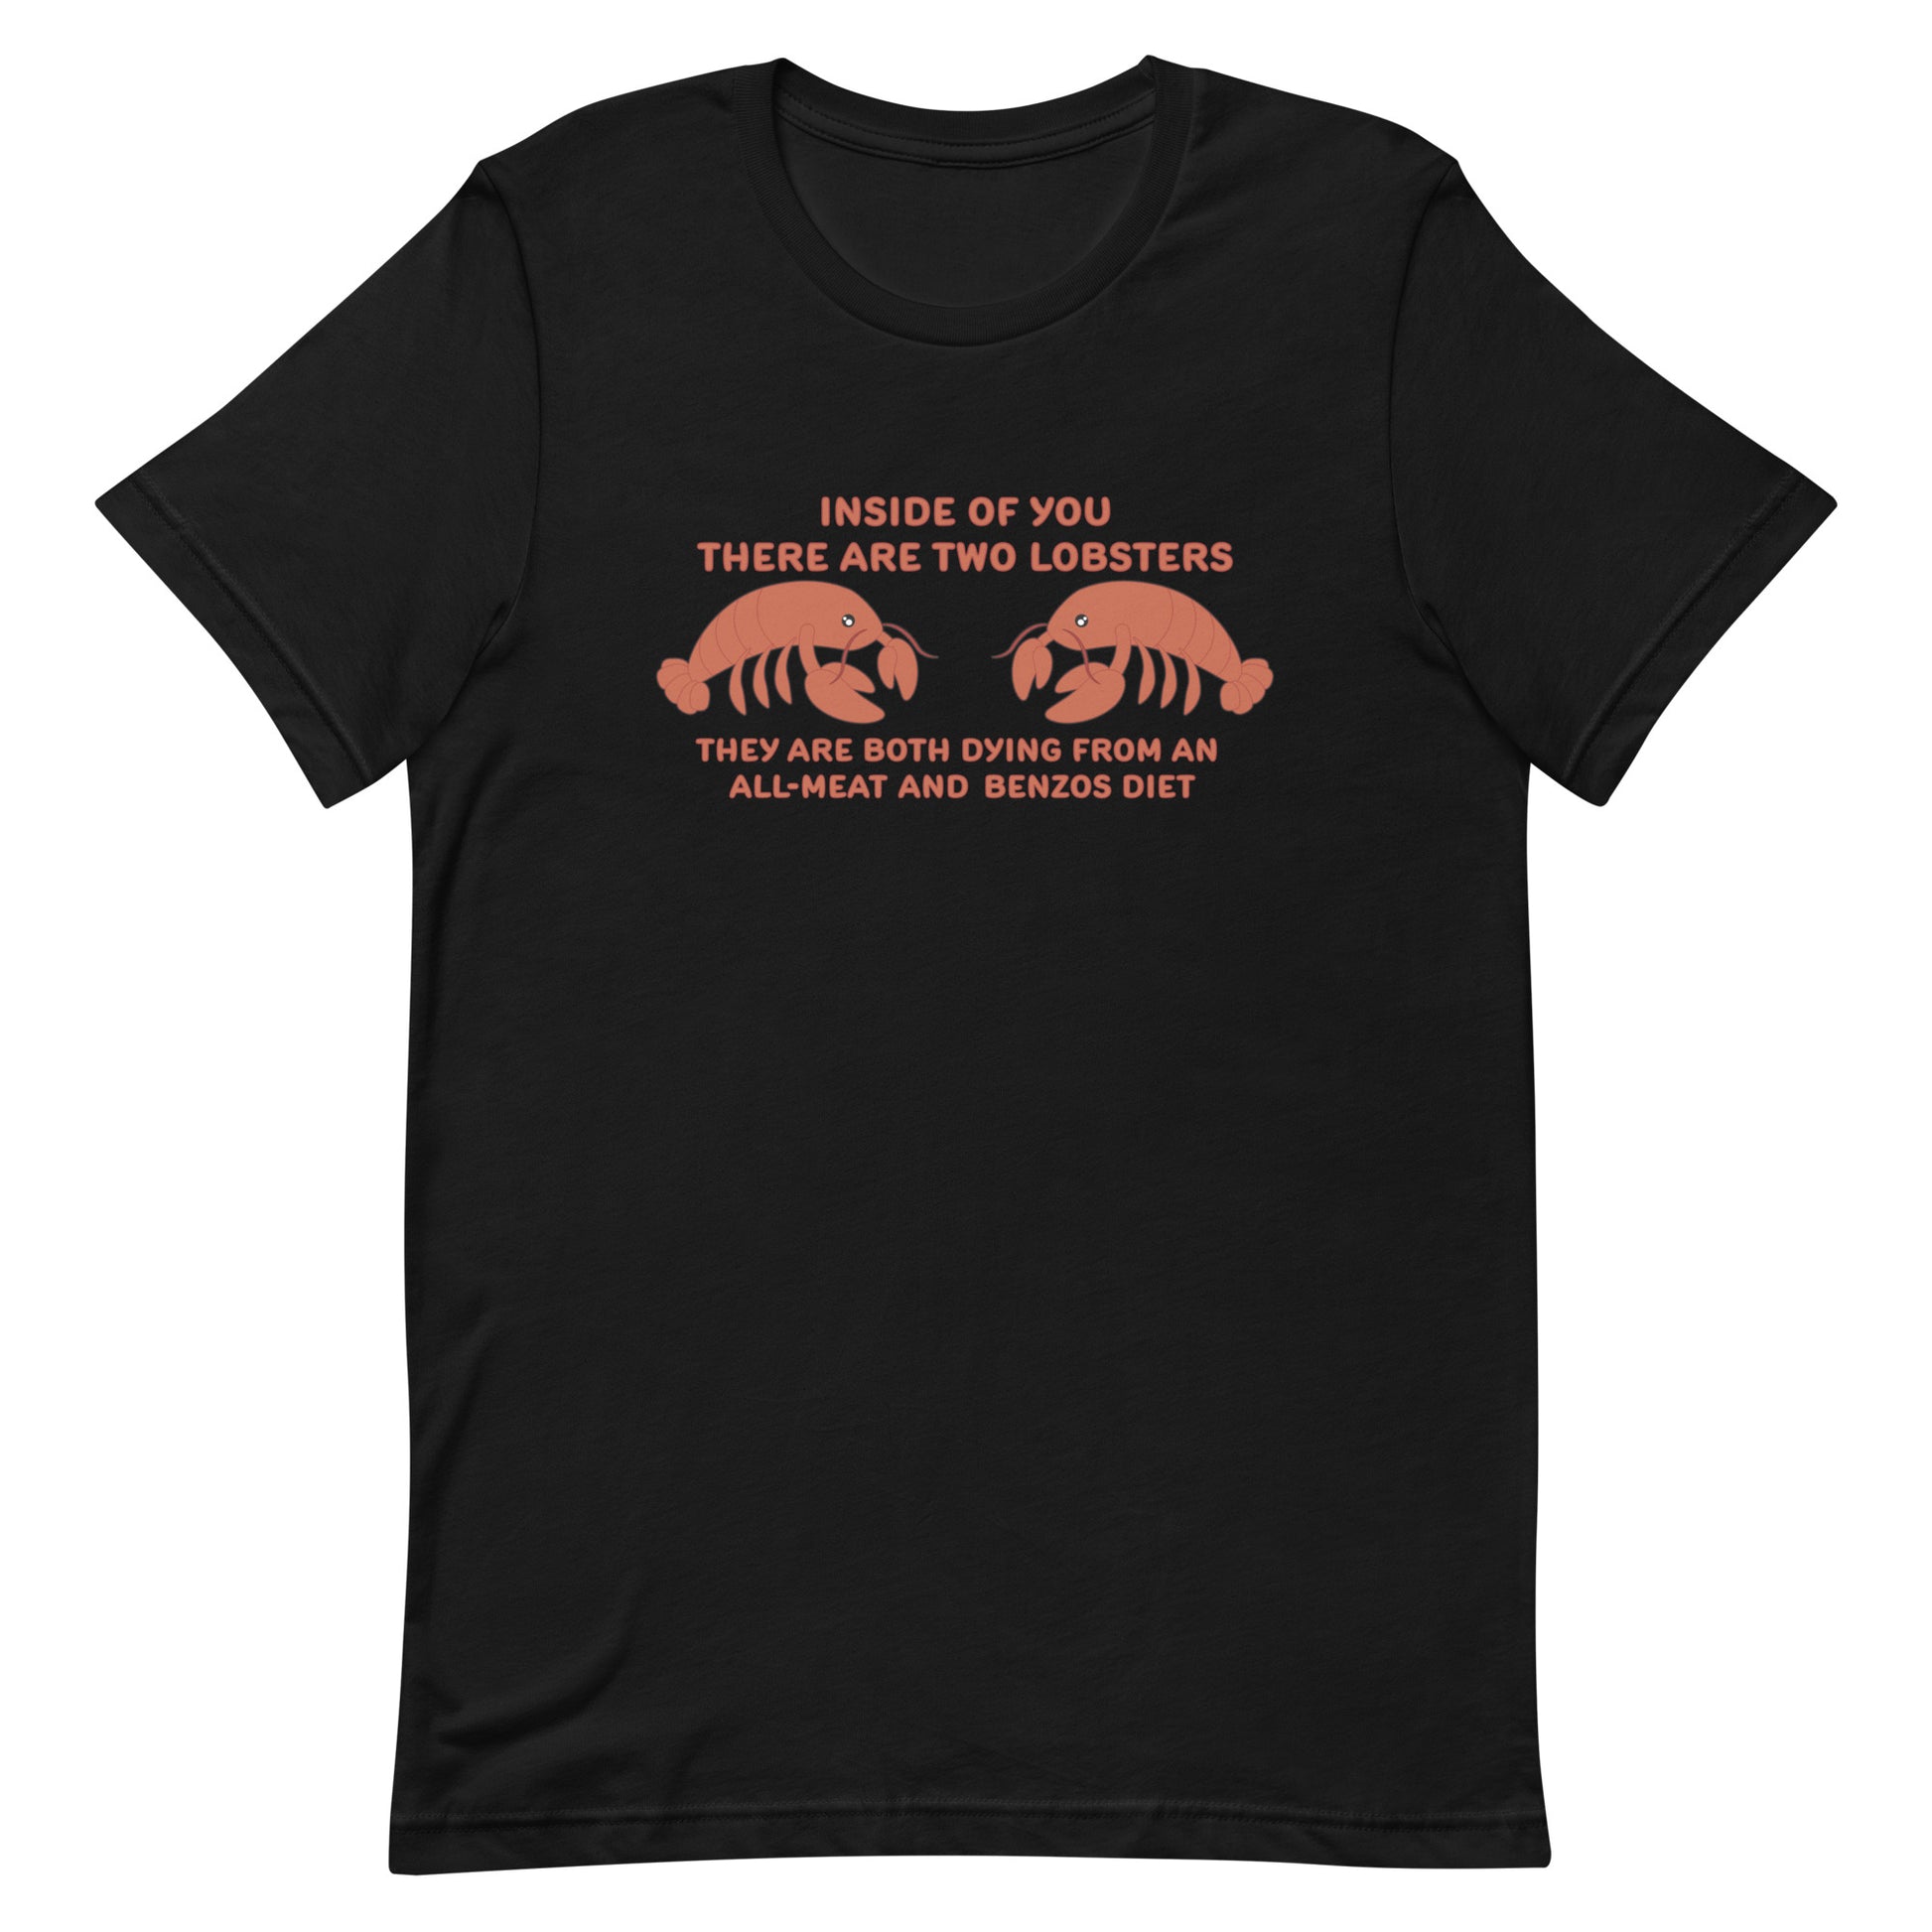 A black crewneck t-shirt featuring an illustration of two lobsters surrounded by text that reads "Inside of you there are two lobsters. They are both dying from an all-meat and benzos diet"